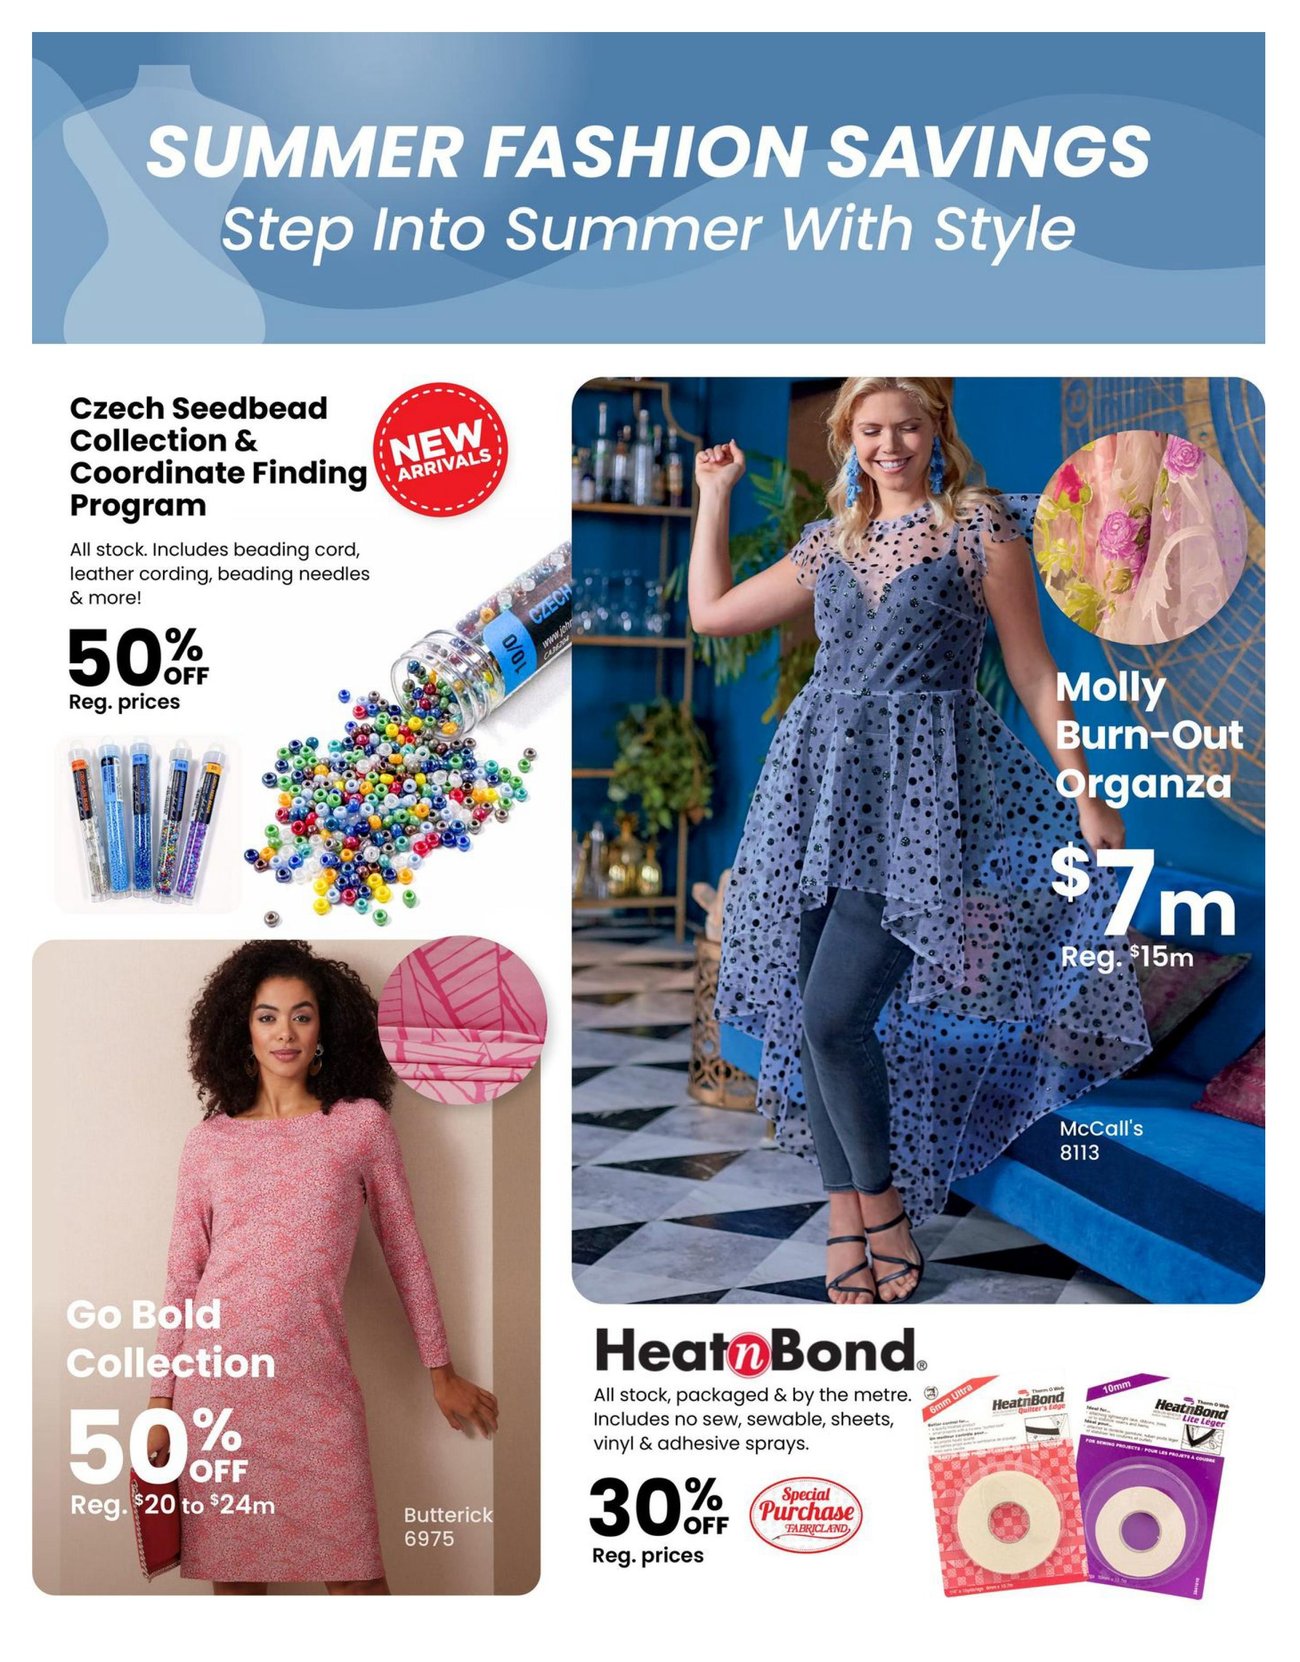 Fabricland (West) Flyer Savings - Page 8